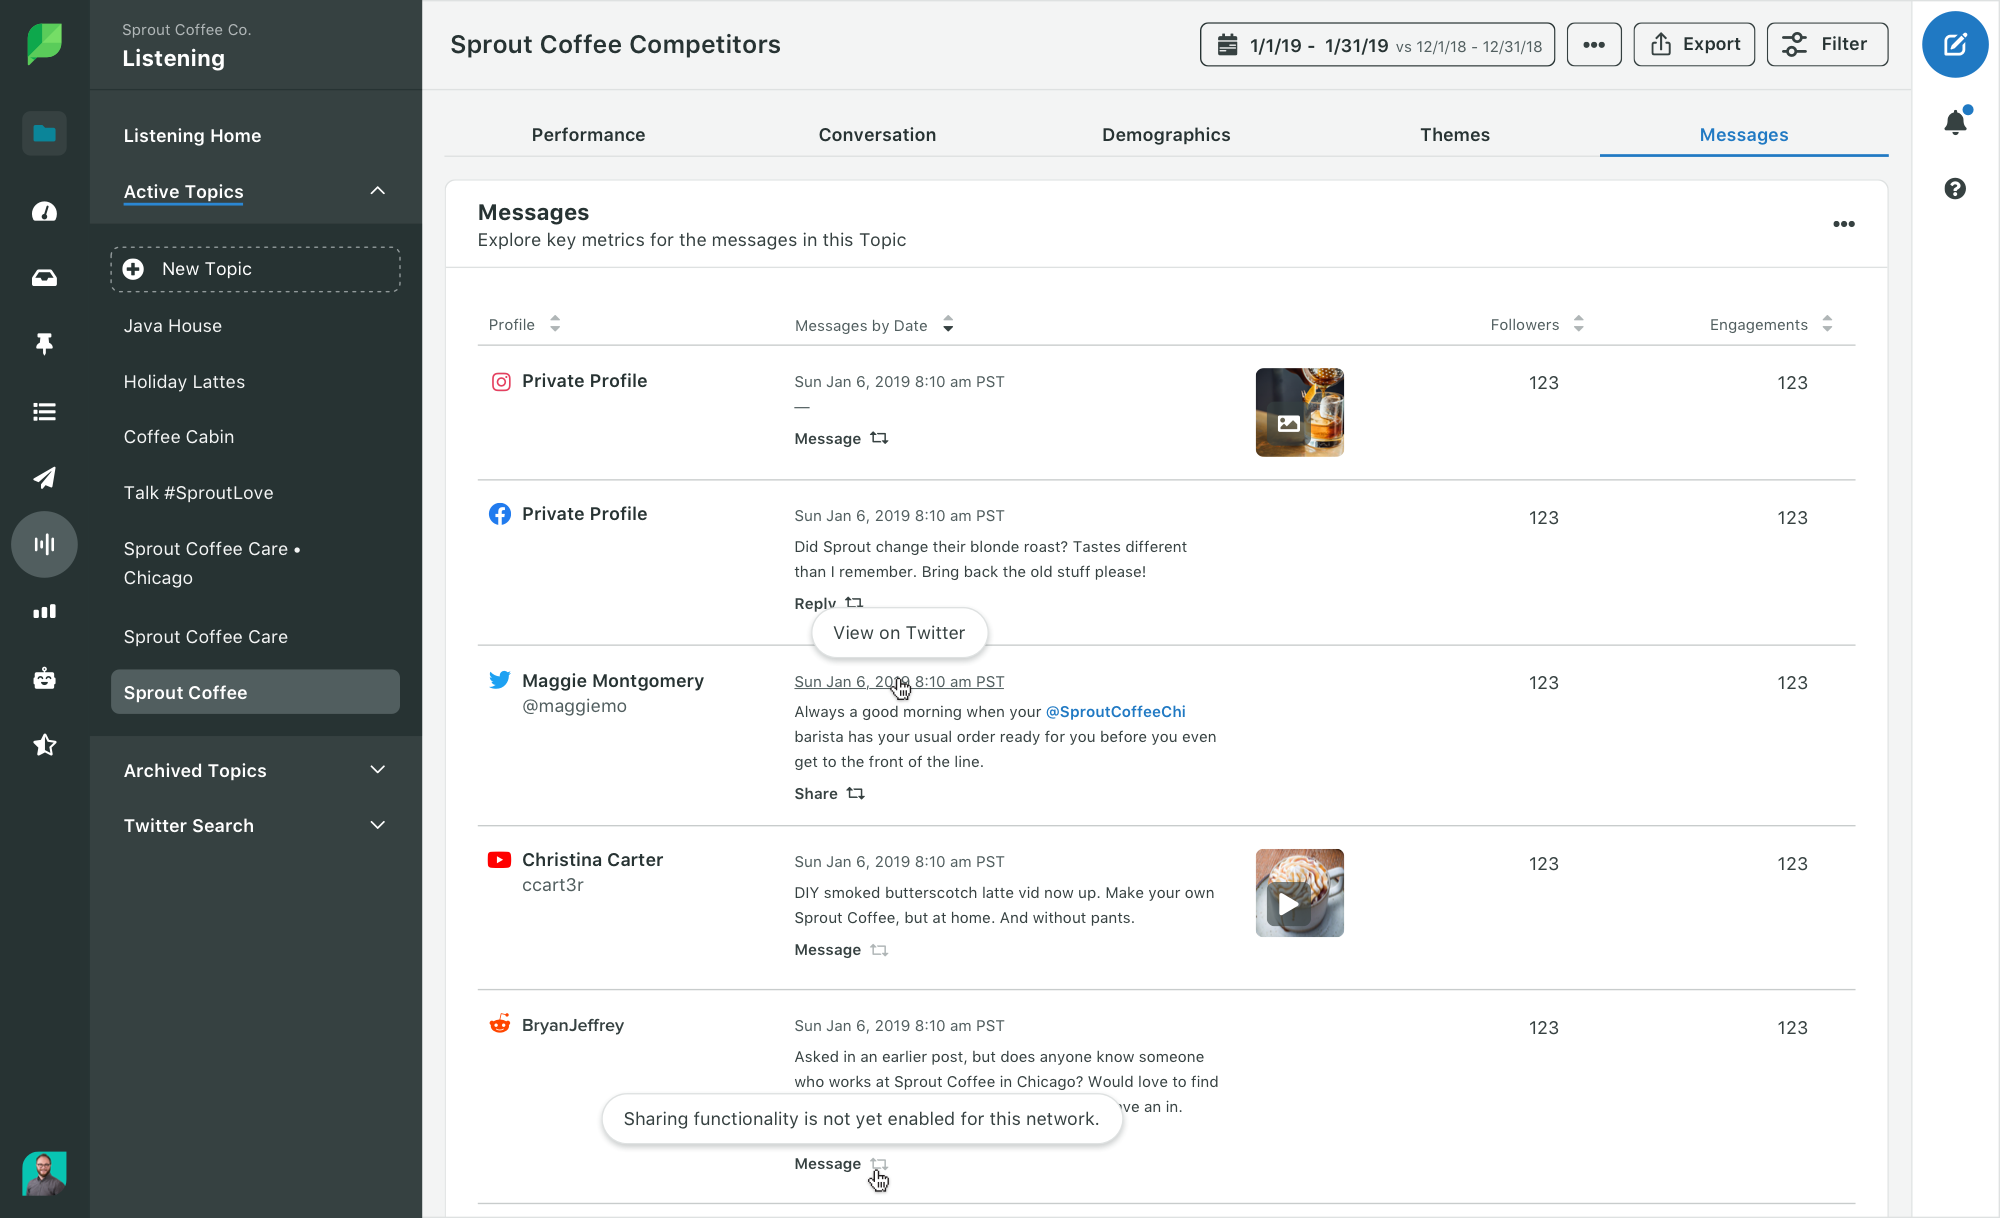 Sprout Social's Listening tool tracks conversations around keywords and topics close to your business and industry.